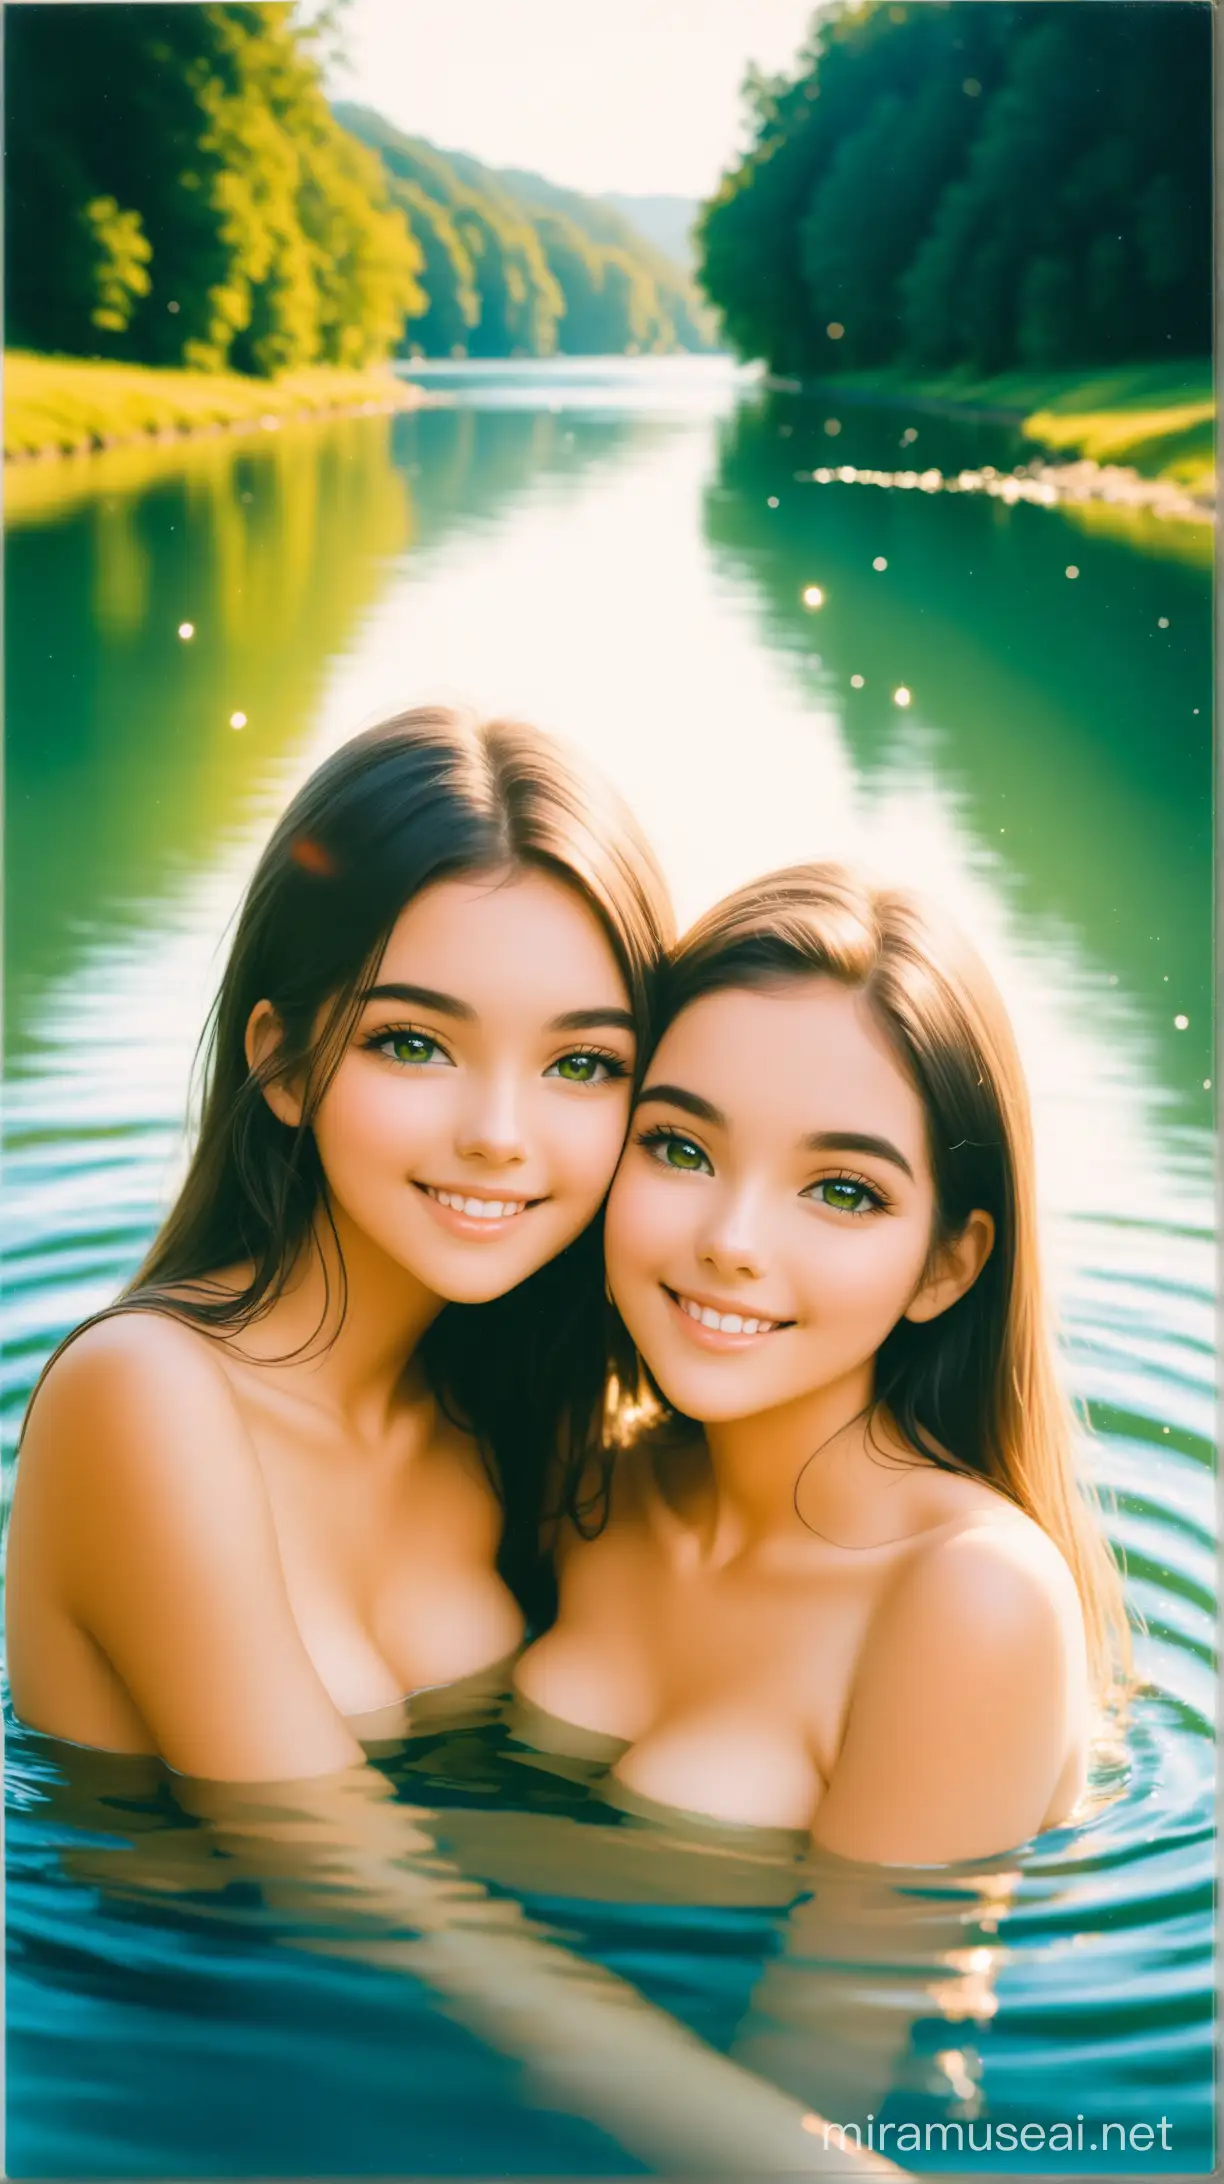 Two beautiful 20-year-old American women, naked but their body is invisible under the water, hugging and smiling the most beautiful smile in the universe, with romantic, innocent eyes sparkling with love, looking at the camera with love.
You swim in a beautiful river among a beautiful green landscape.
The image was captured on a full-frame mirrorless camera, using a 50mm prime lens, captured on Polaroid SX-70 film, with a dynamic mix of sunlight and urban lighting creating a vivid background as a highlight.